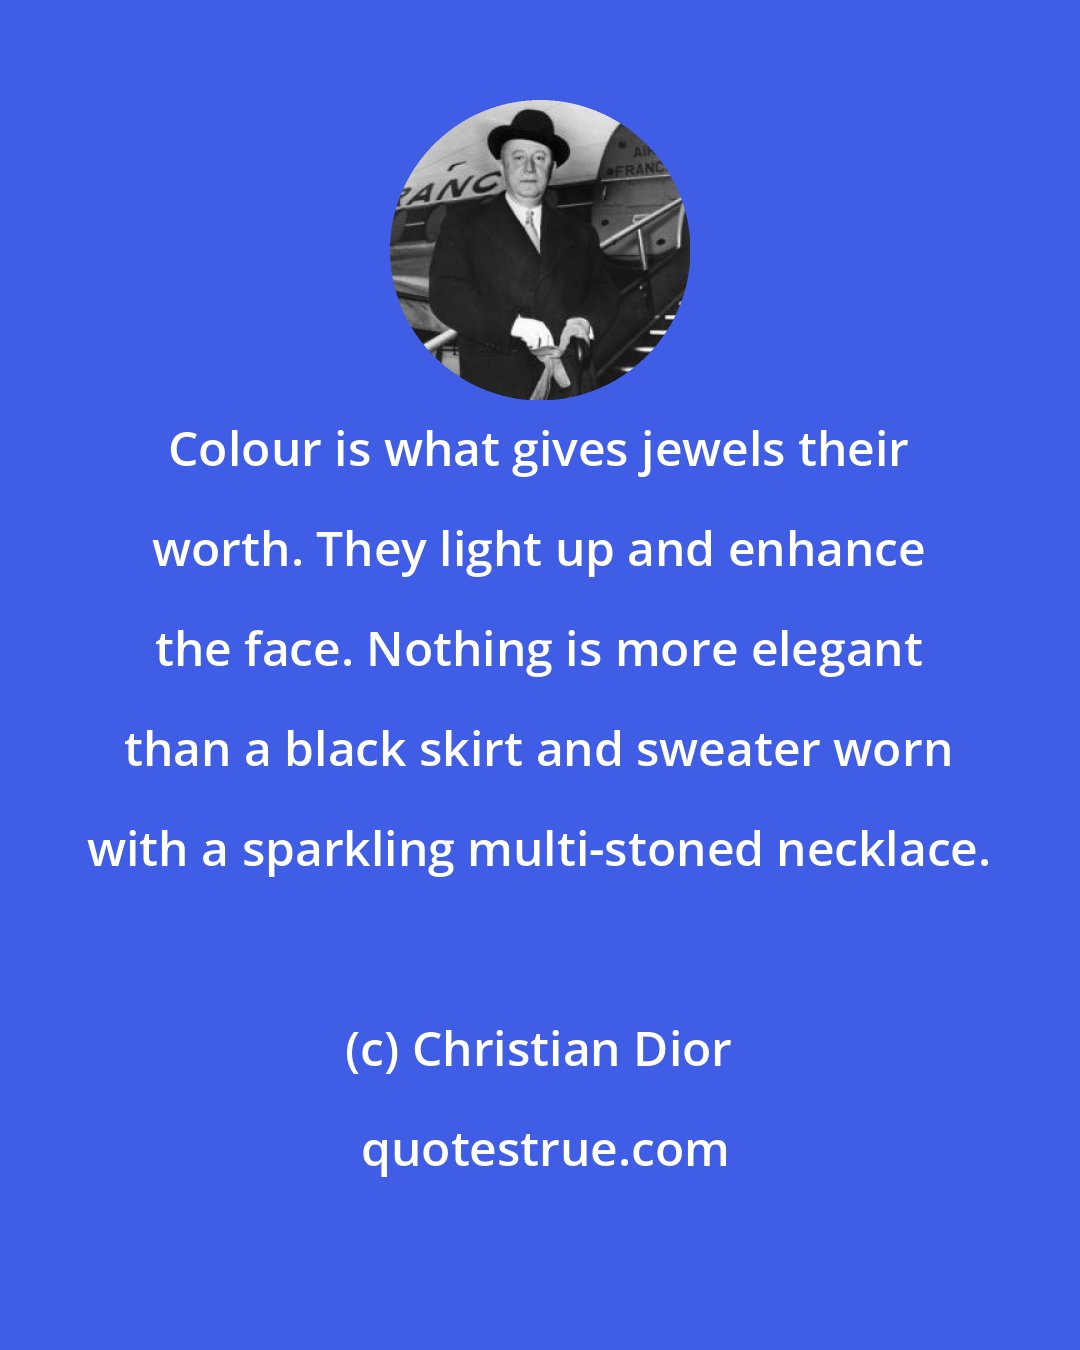 Christian Dior: Colour is what gives jewels their worth. They light up and enhance the face. Nothing is more elegant than a black skirt and sweater worn with a sparkling multi-stoned necklace.